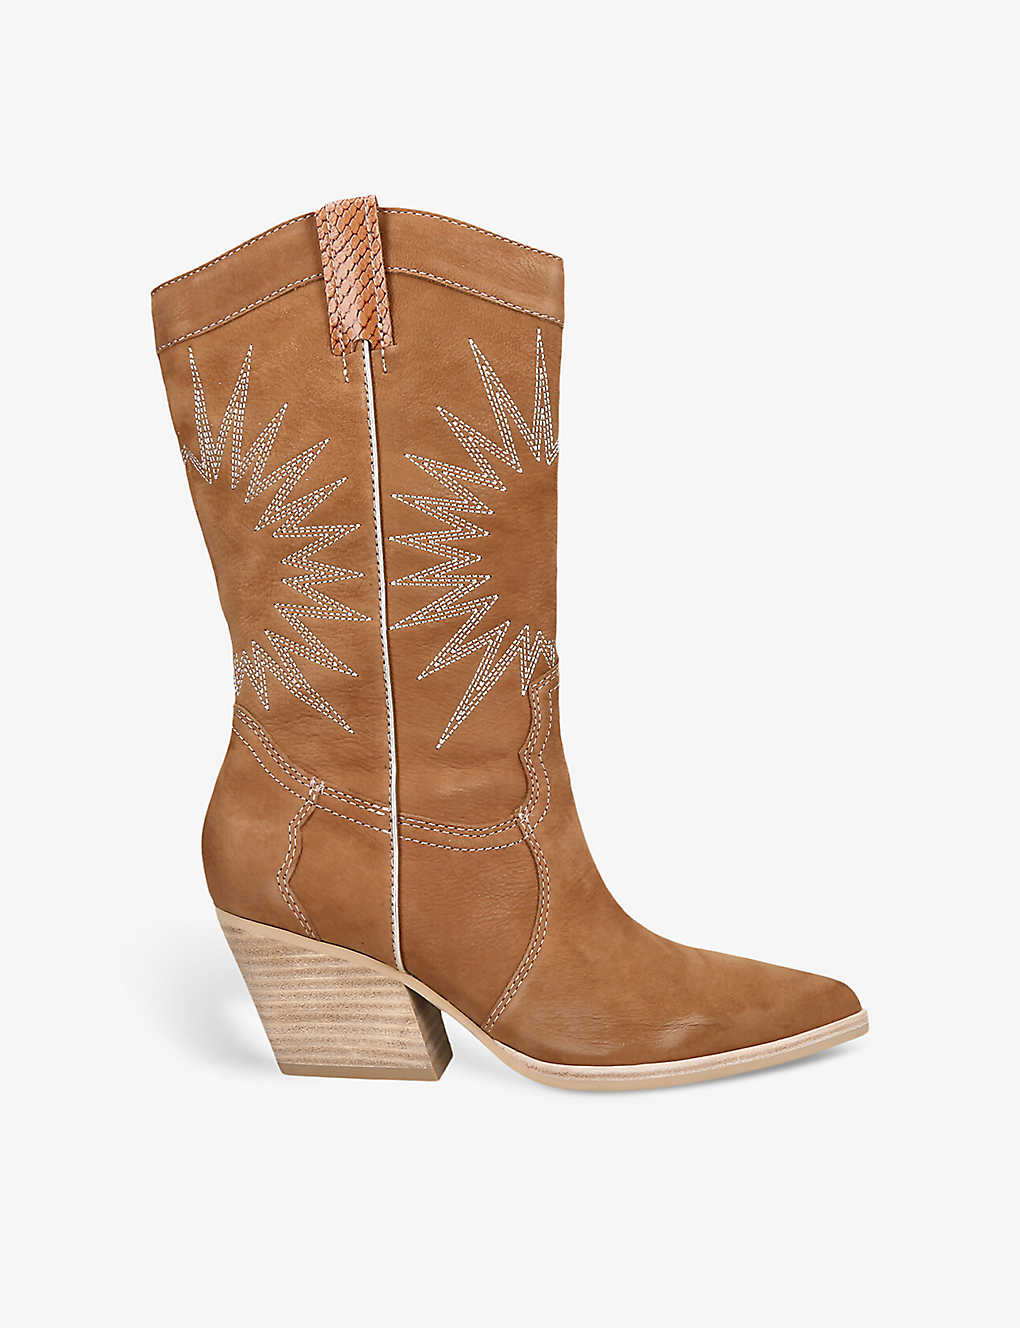 Dolce Vita Womens Tan Lawson Sunburst-embroidered Leather Heeled Cowboy Boots